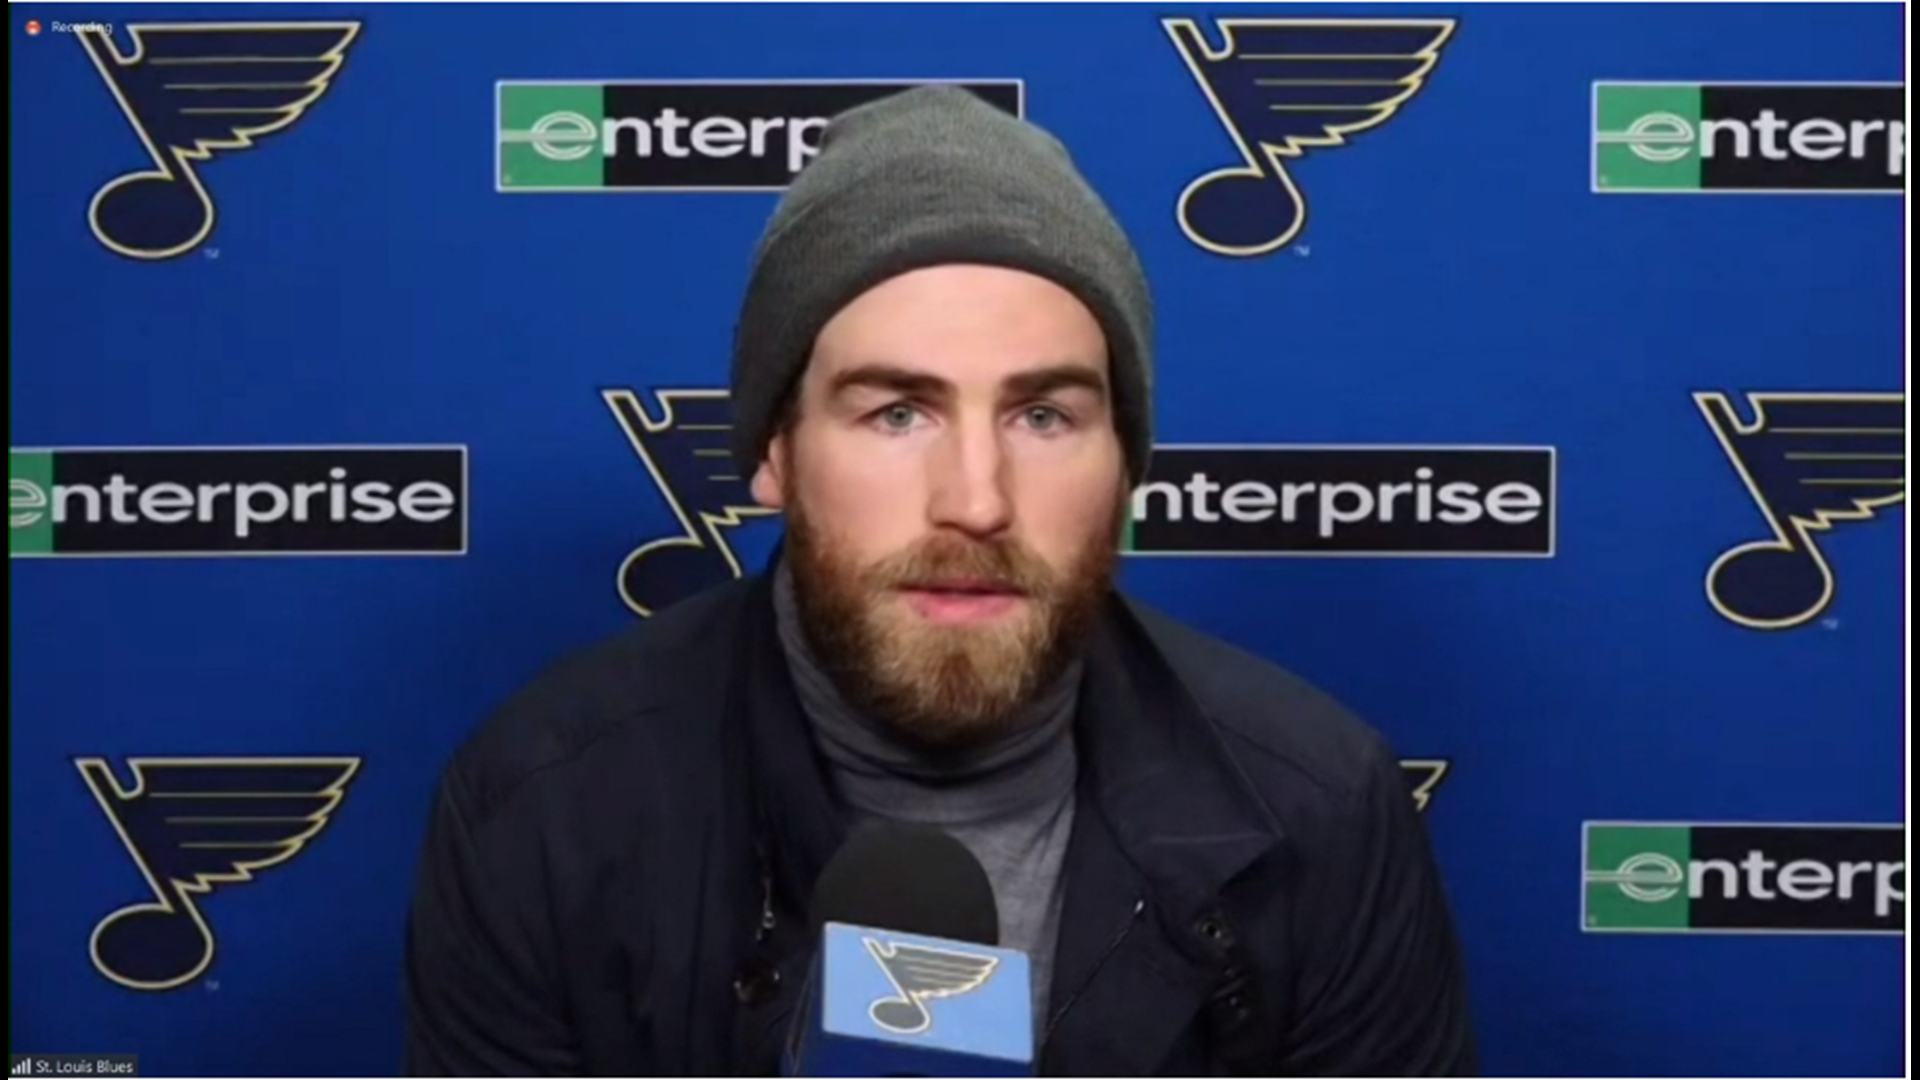 Blues captain Ryan O'Reilly talked about Bob Plager's importance to the team.